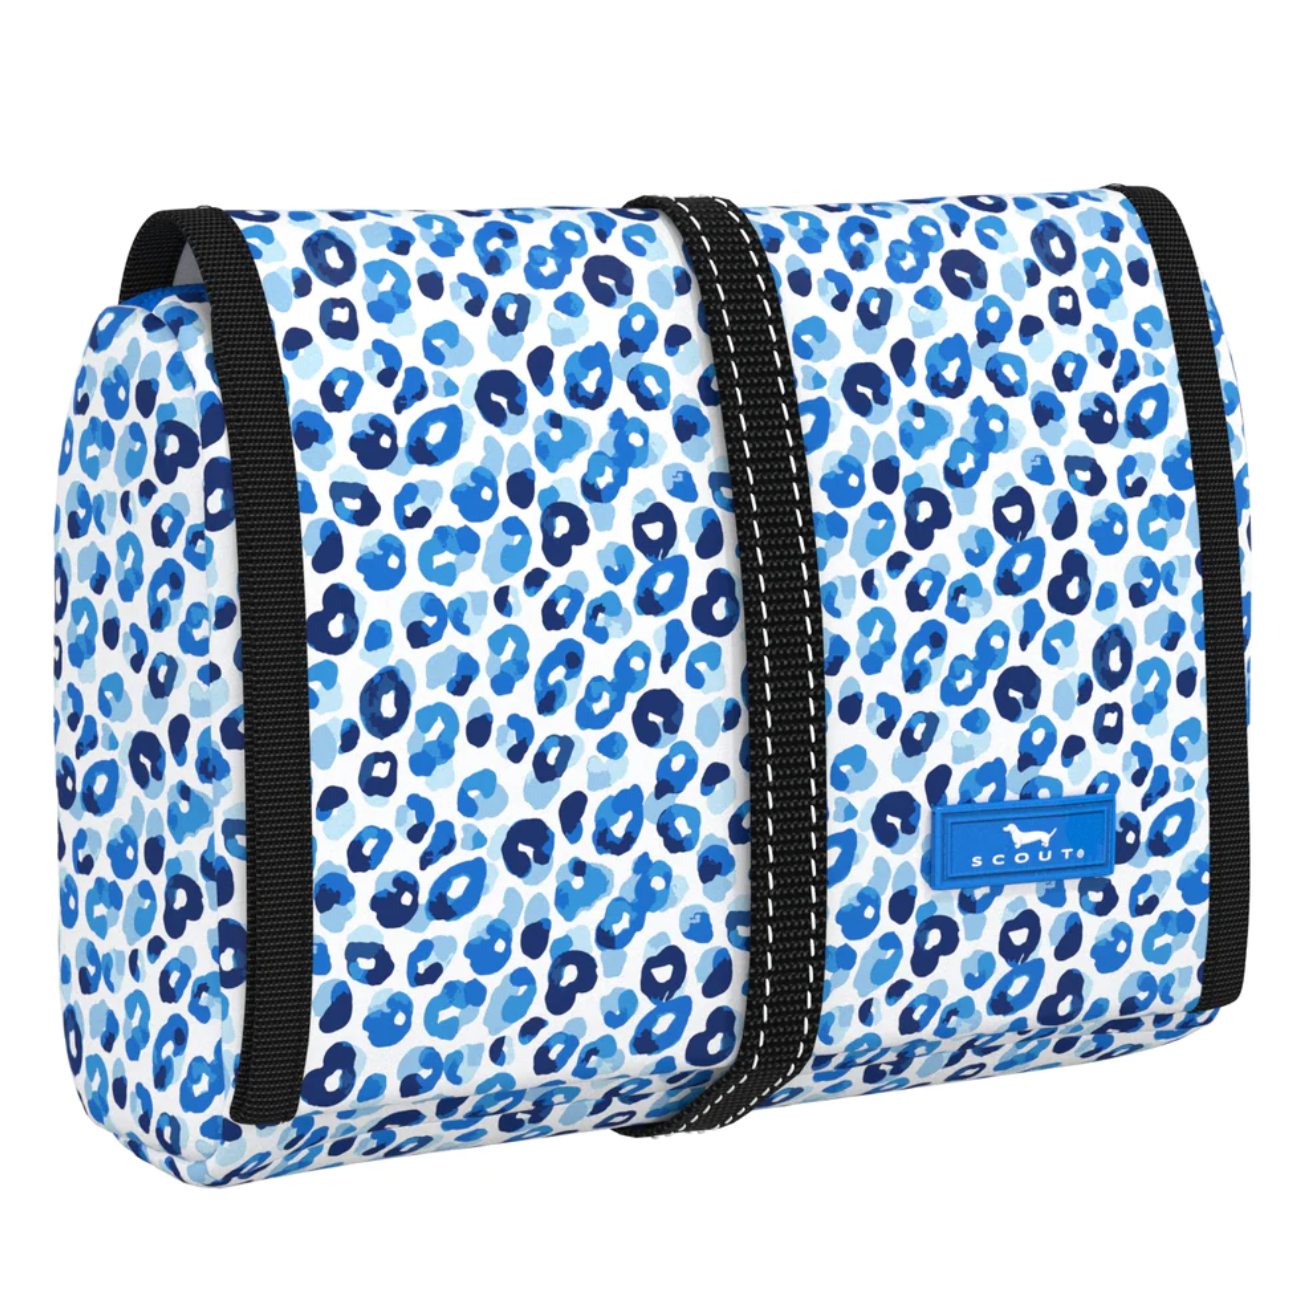 Scout Beauty Burrito Toiletry Bag Travel Accessories in Teachers Pet at Wrapsody